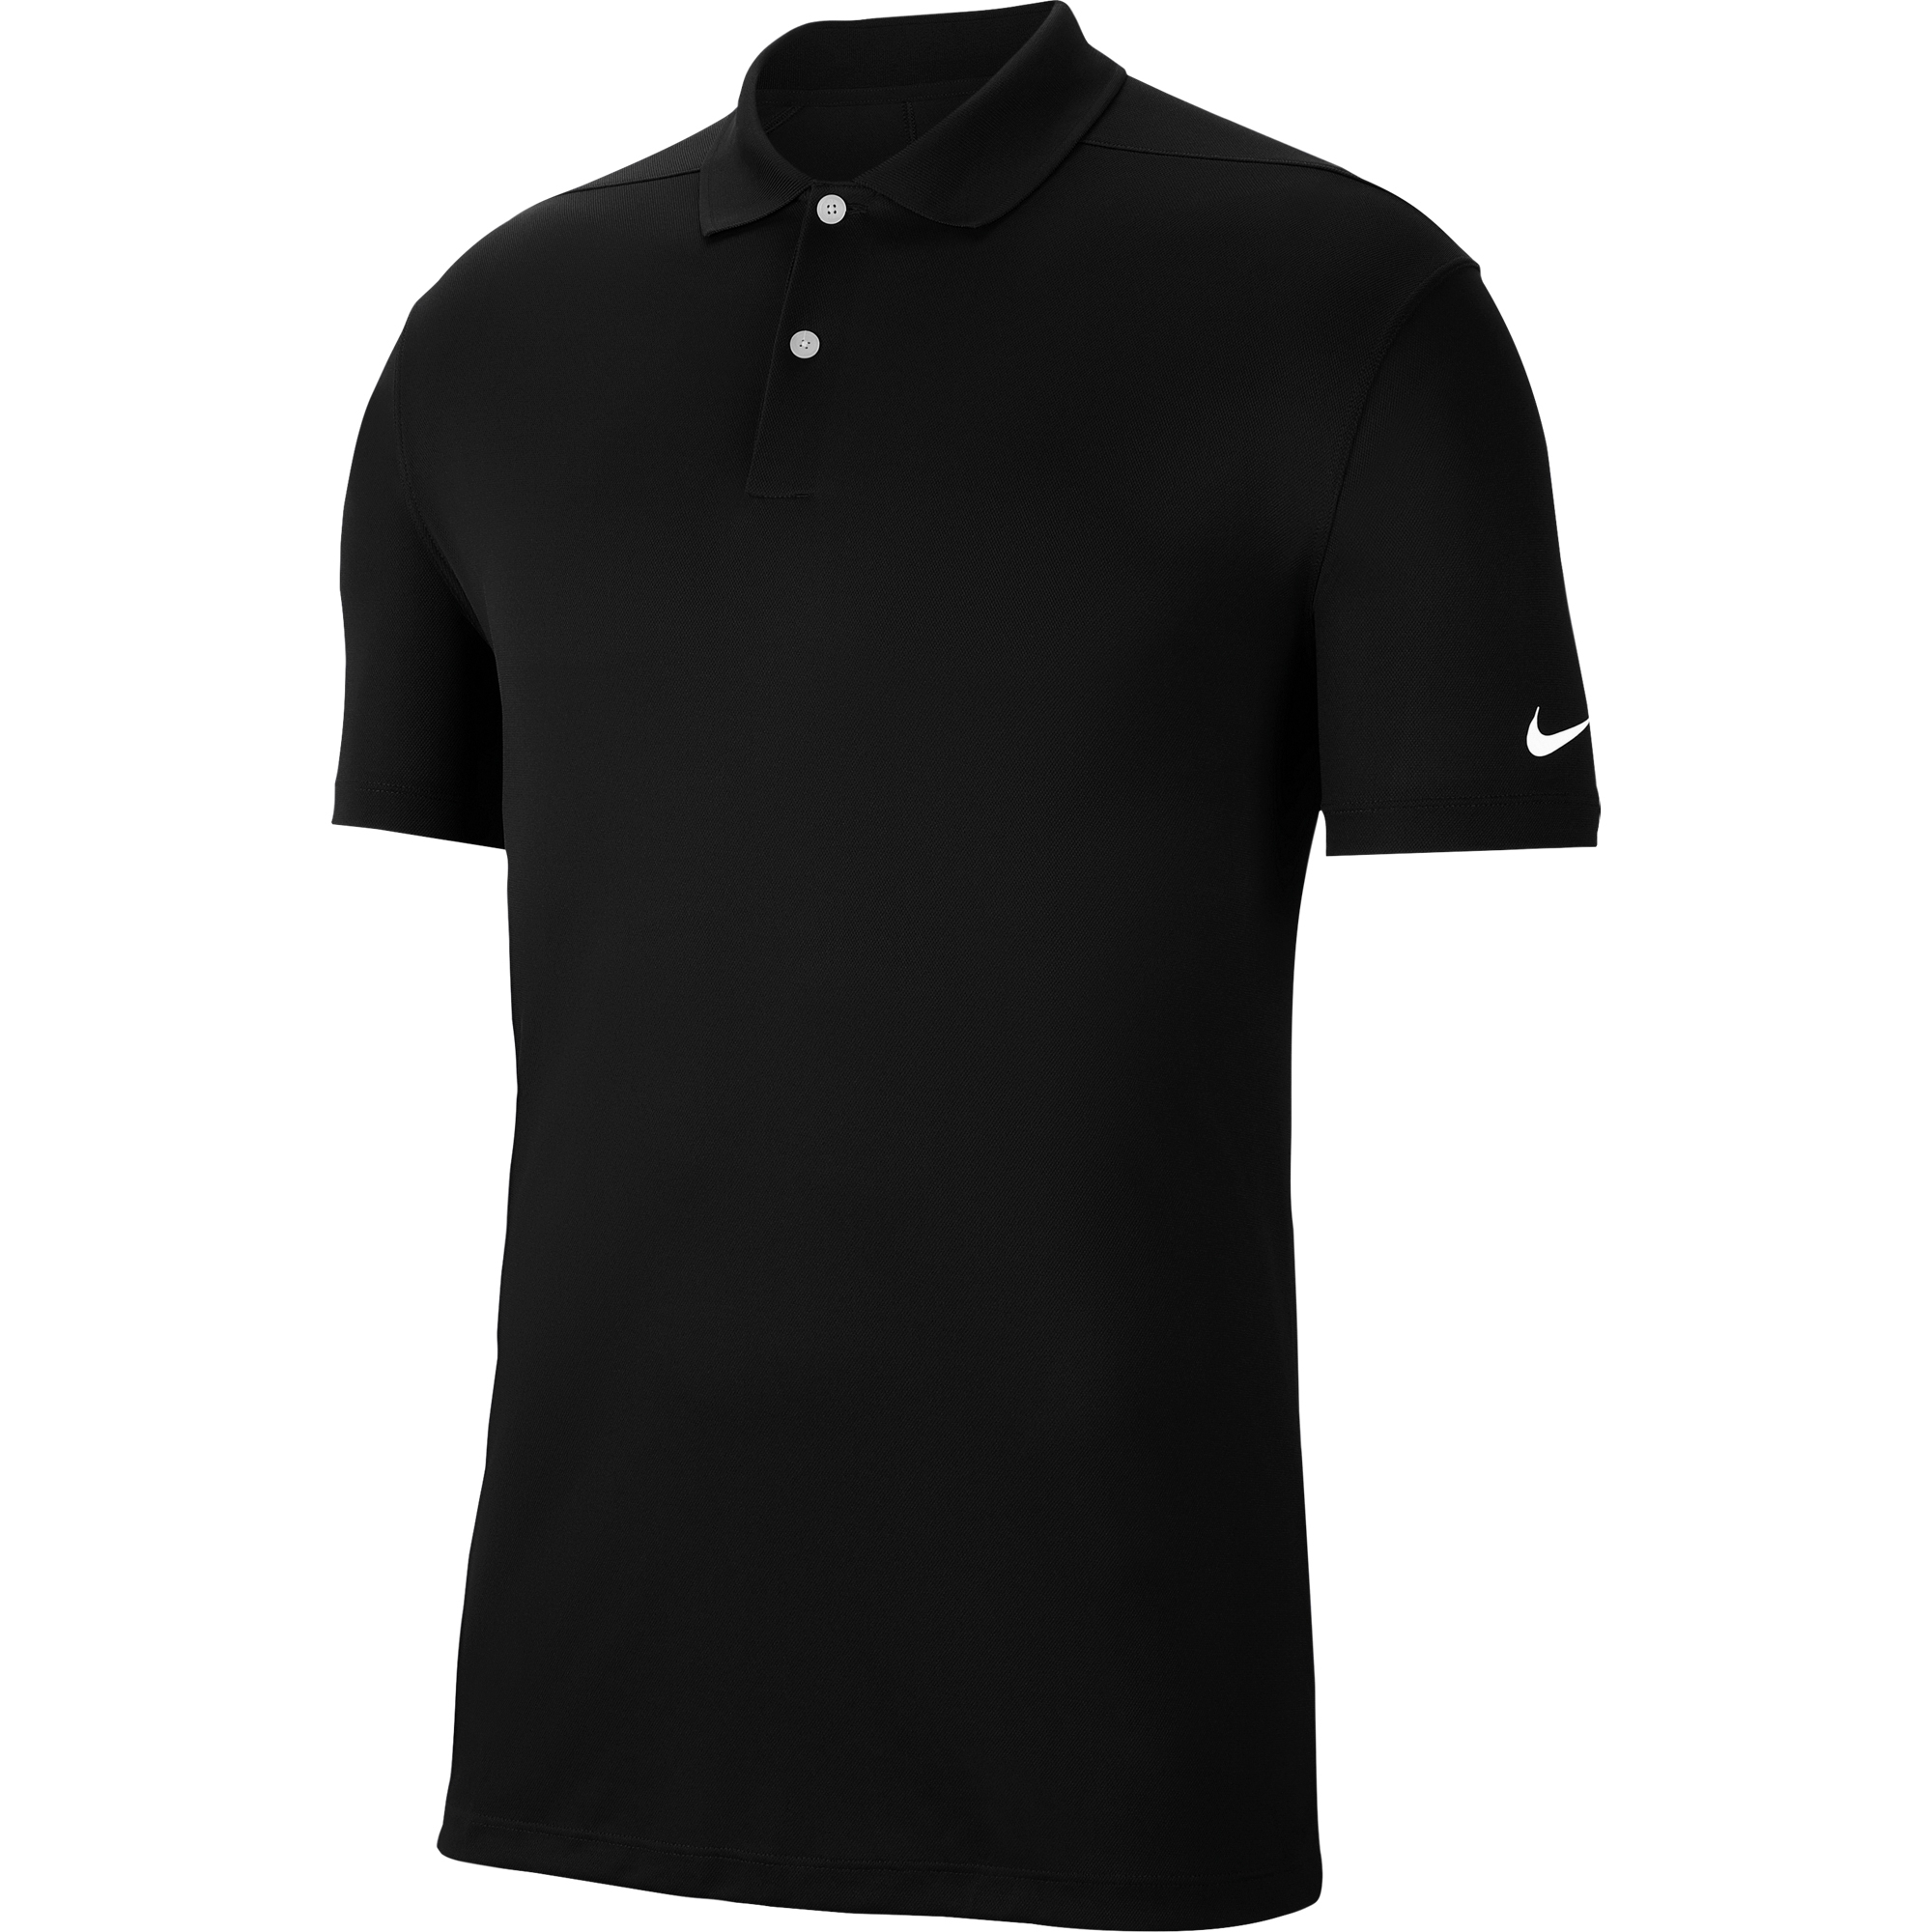 Nike Mens Dry Fit Solid Victory Golf Polo Shirt S- Chest 35-37.5'